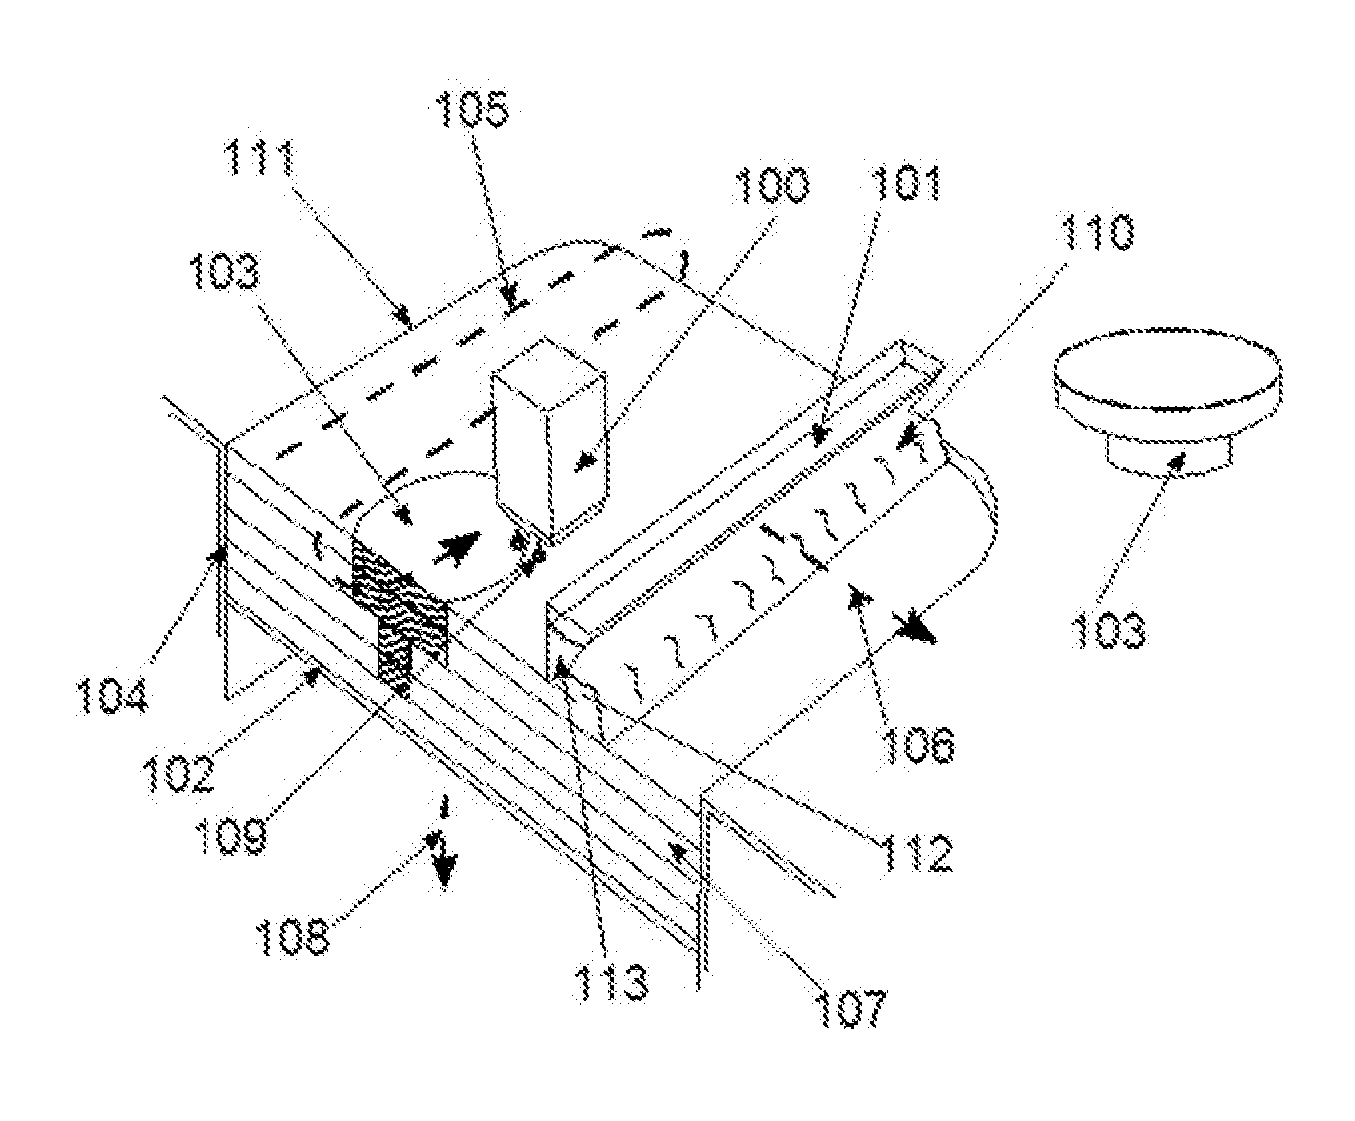 Method and device for producing three-dimensional models using a binding agent system